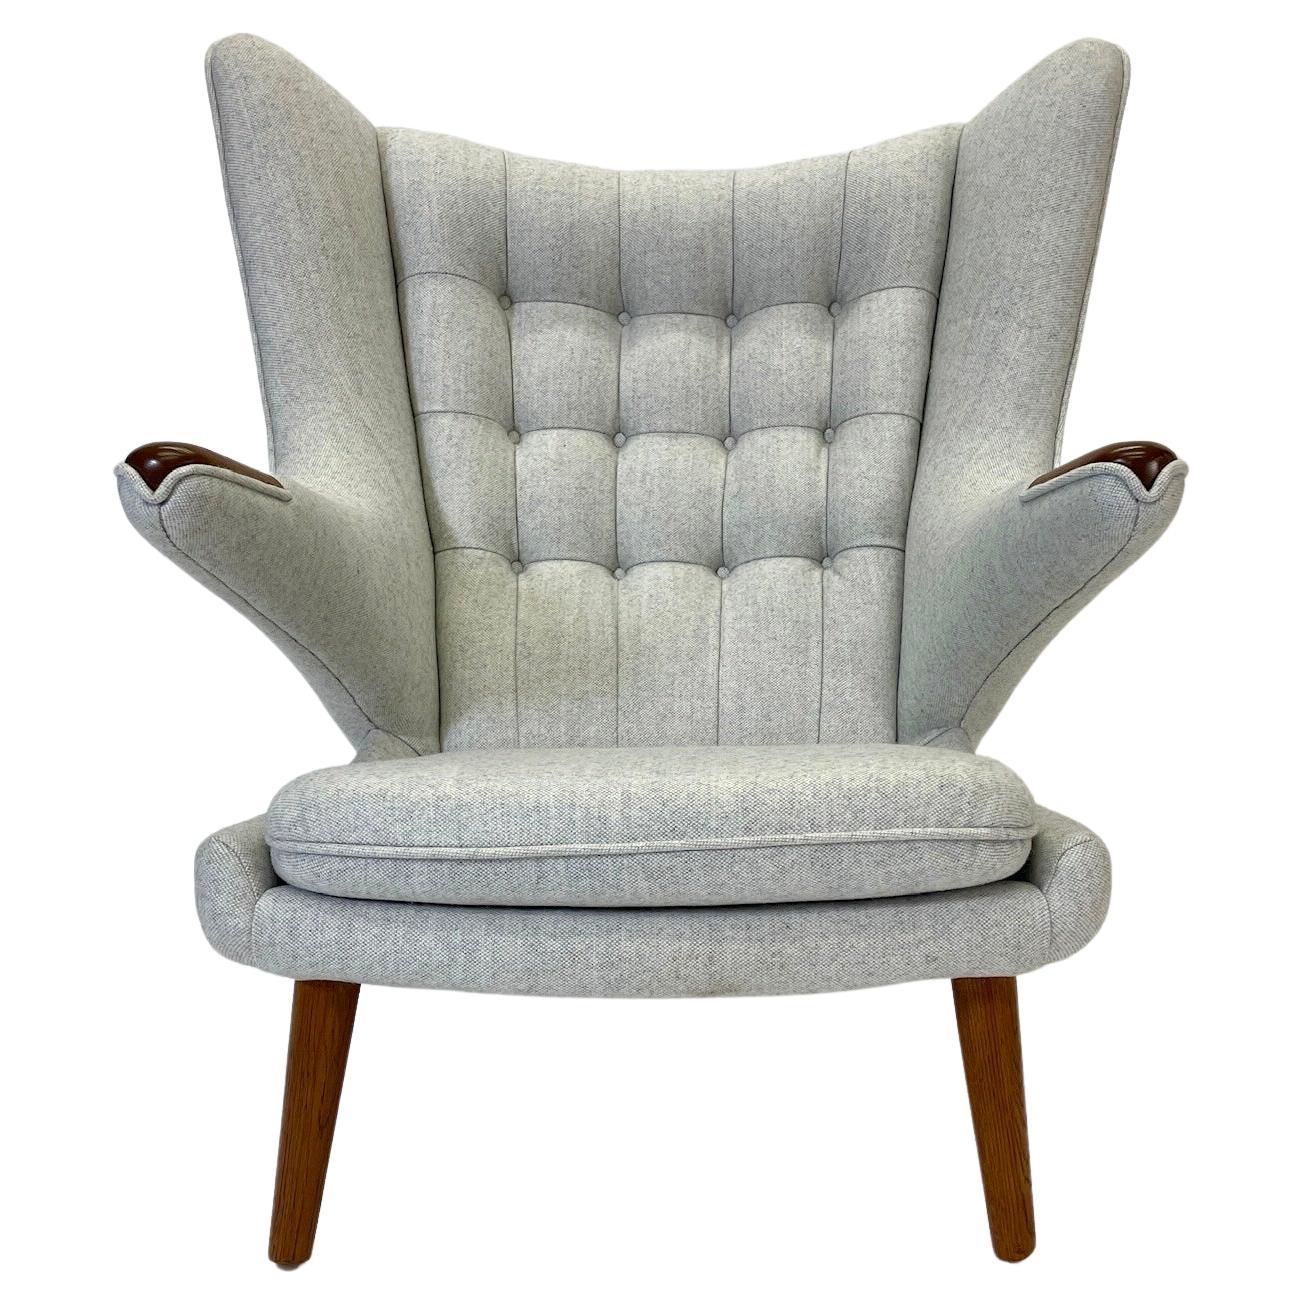 The Papa Bear Chair is absolutely stunning.  The AP-29 is a  truly iconic chair newly upholstered in a soft beautiful grey Maharam wool. The chair features beautiful oak legs and teak paws.

These chairs, whilst created during the Mid-century modern